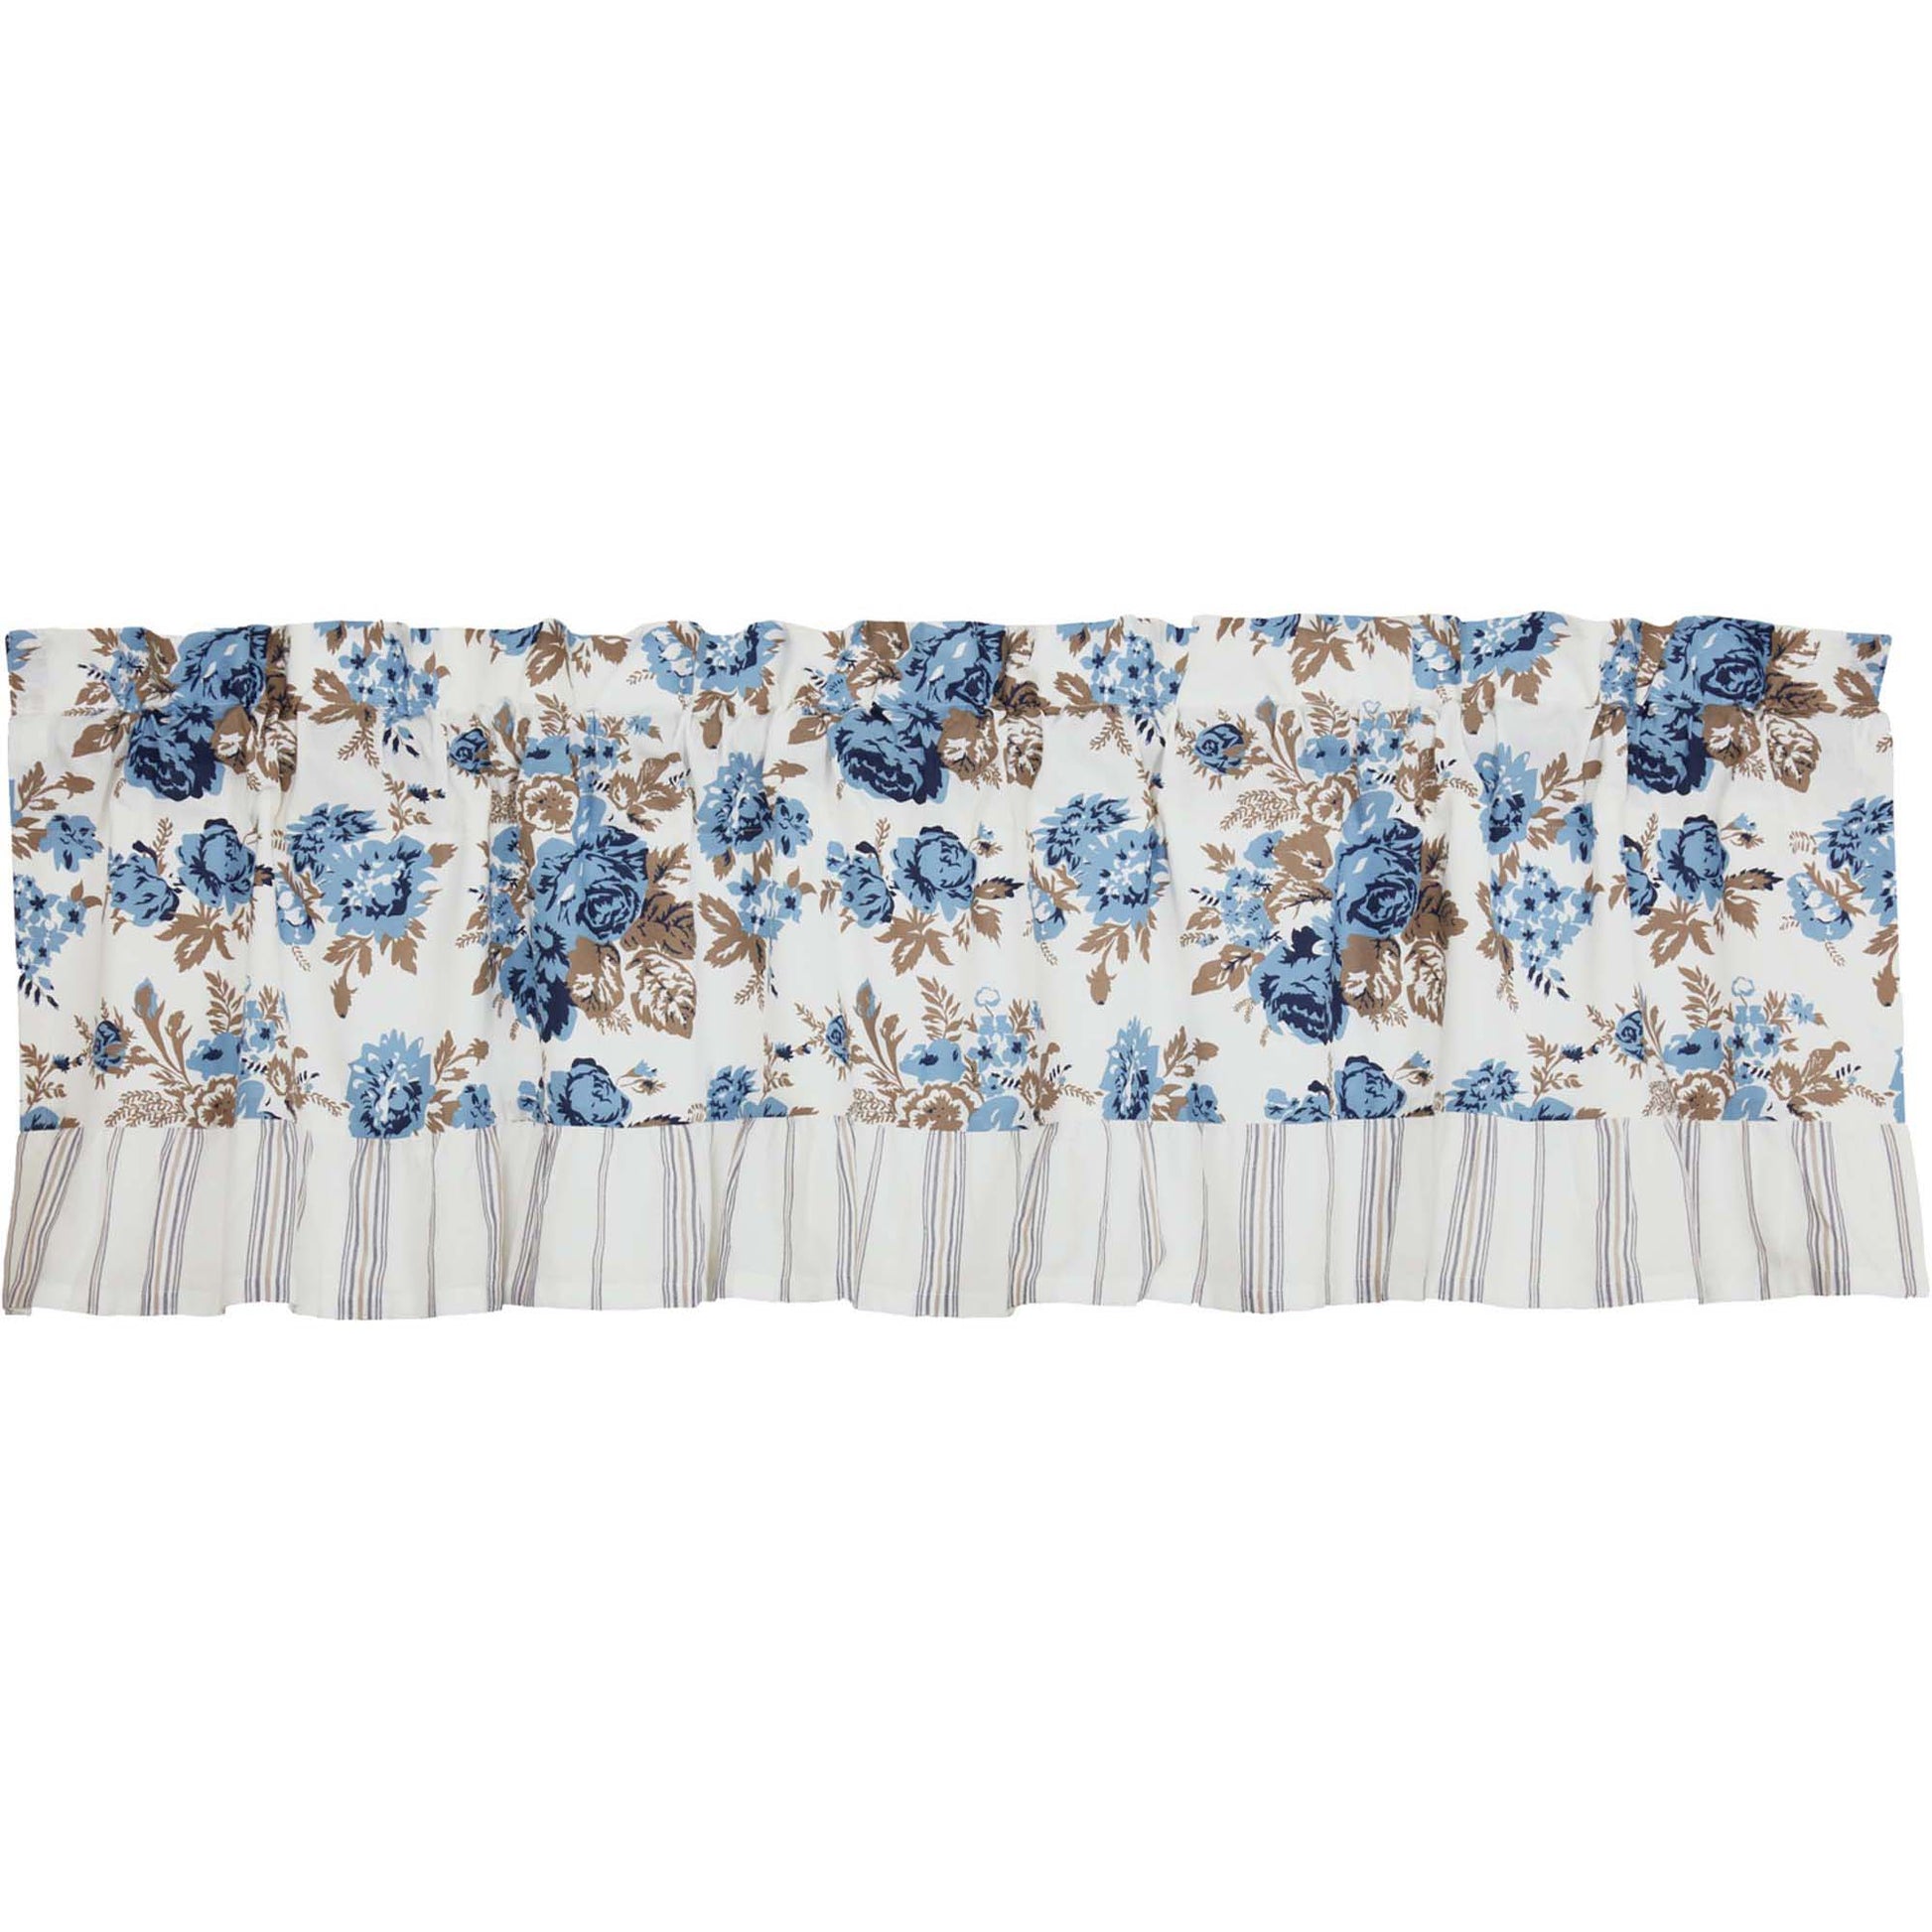 70003-Annie-Blue-Floral-Ruffled-Valance-16x60-image-8